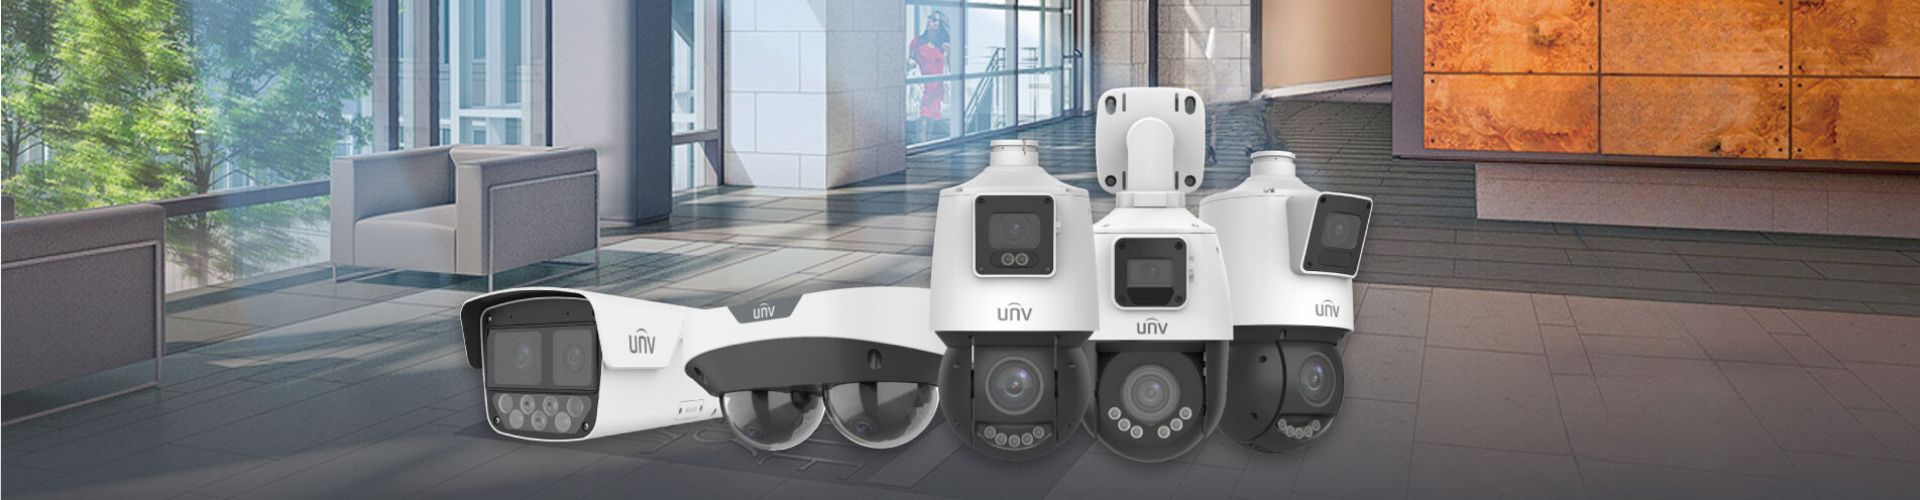 Uniview-Security-Cameras_2-CTC Communications